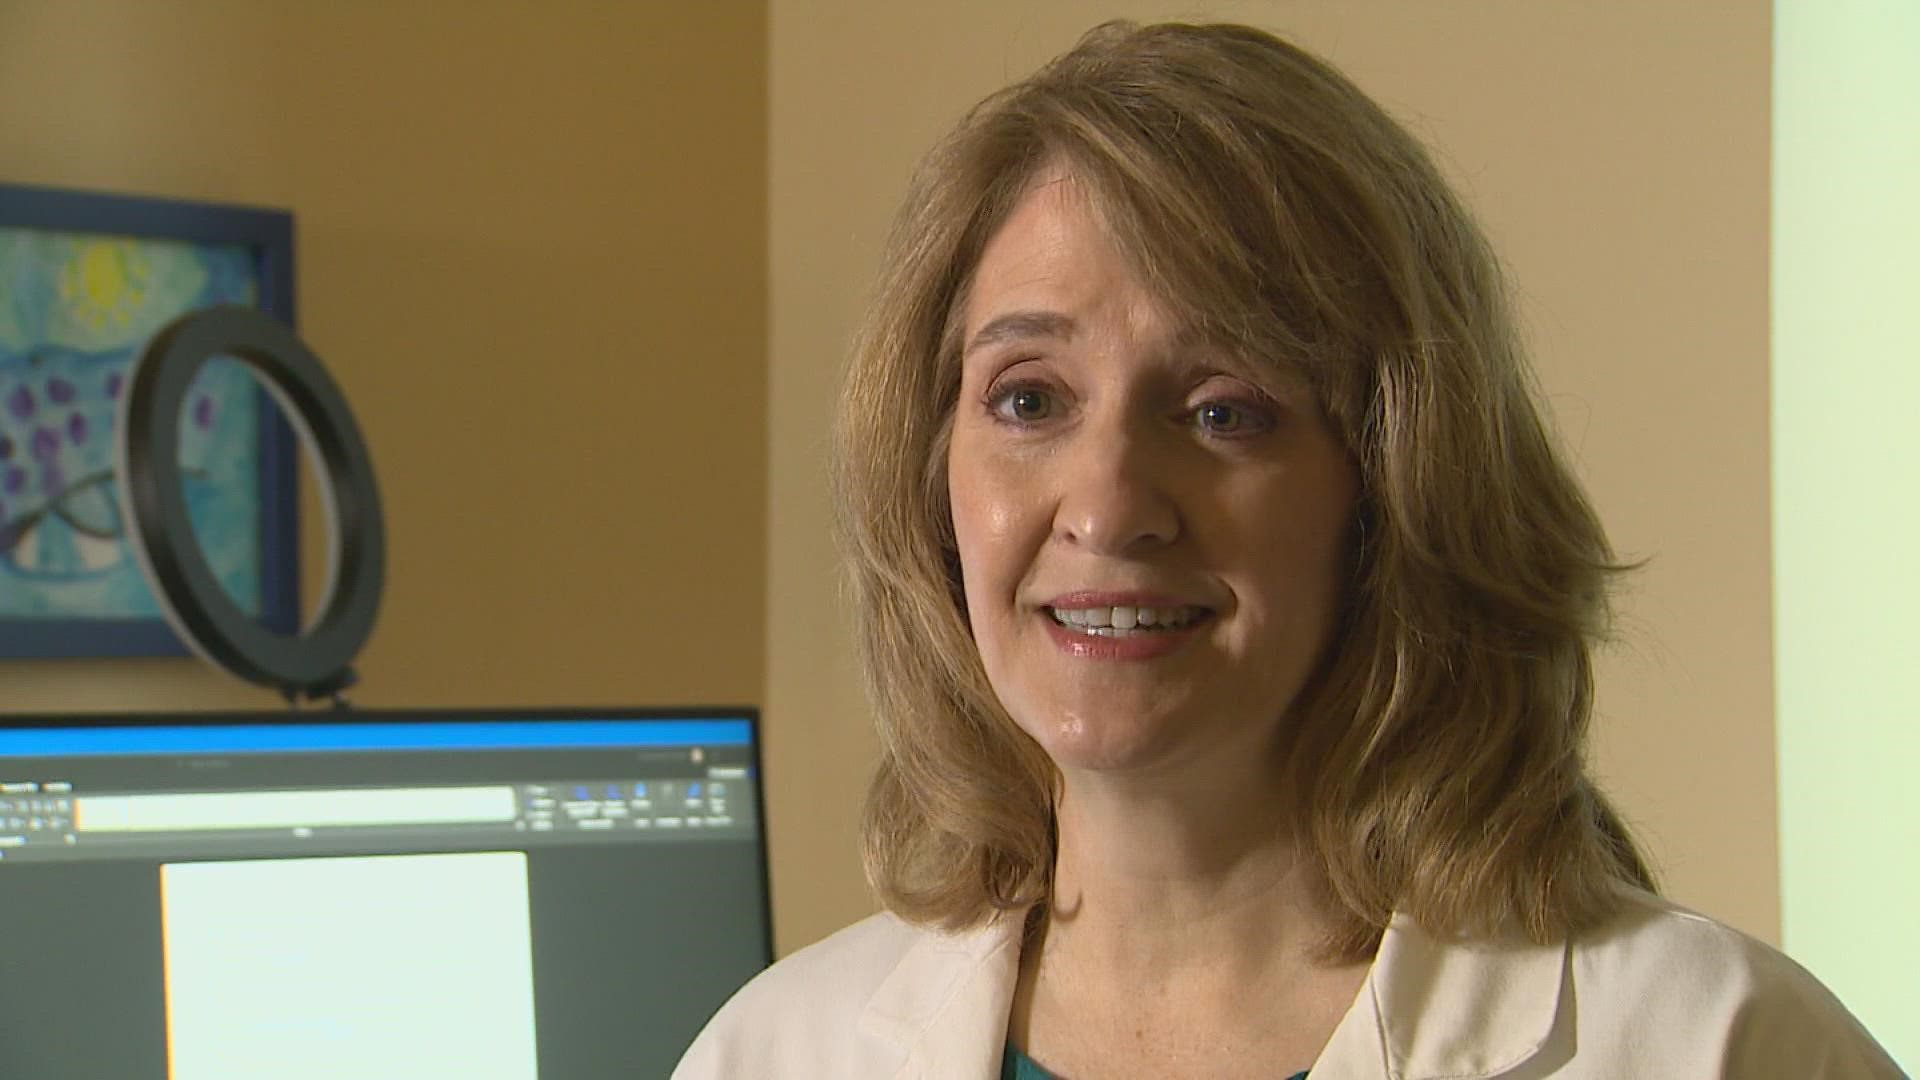 A UW doctor and mom is leading the effort against COVID-19 vaccine misinformation around pregnancy.